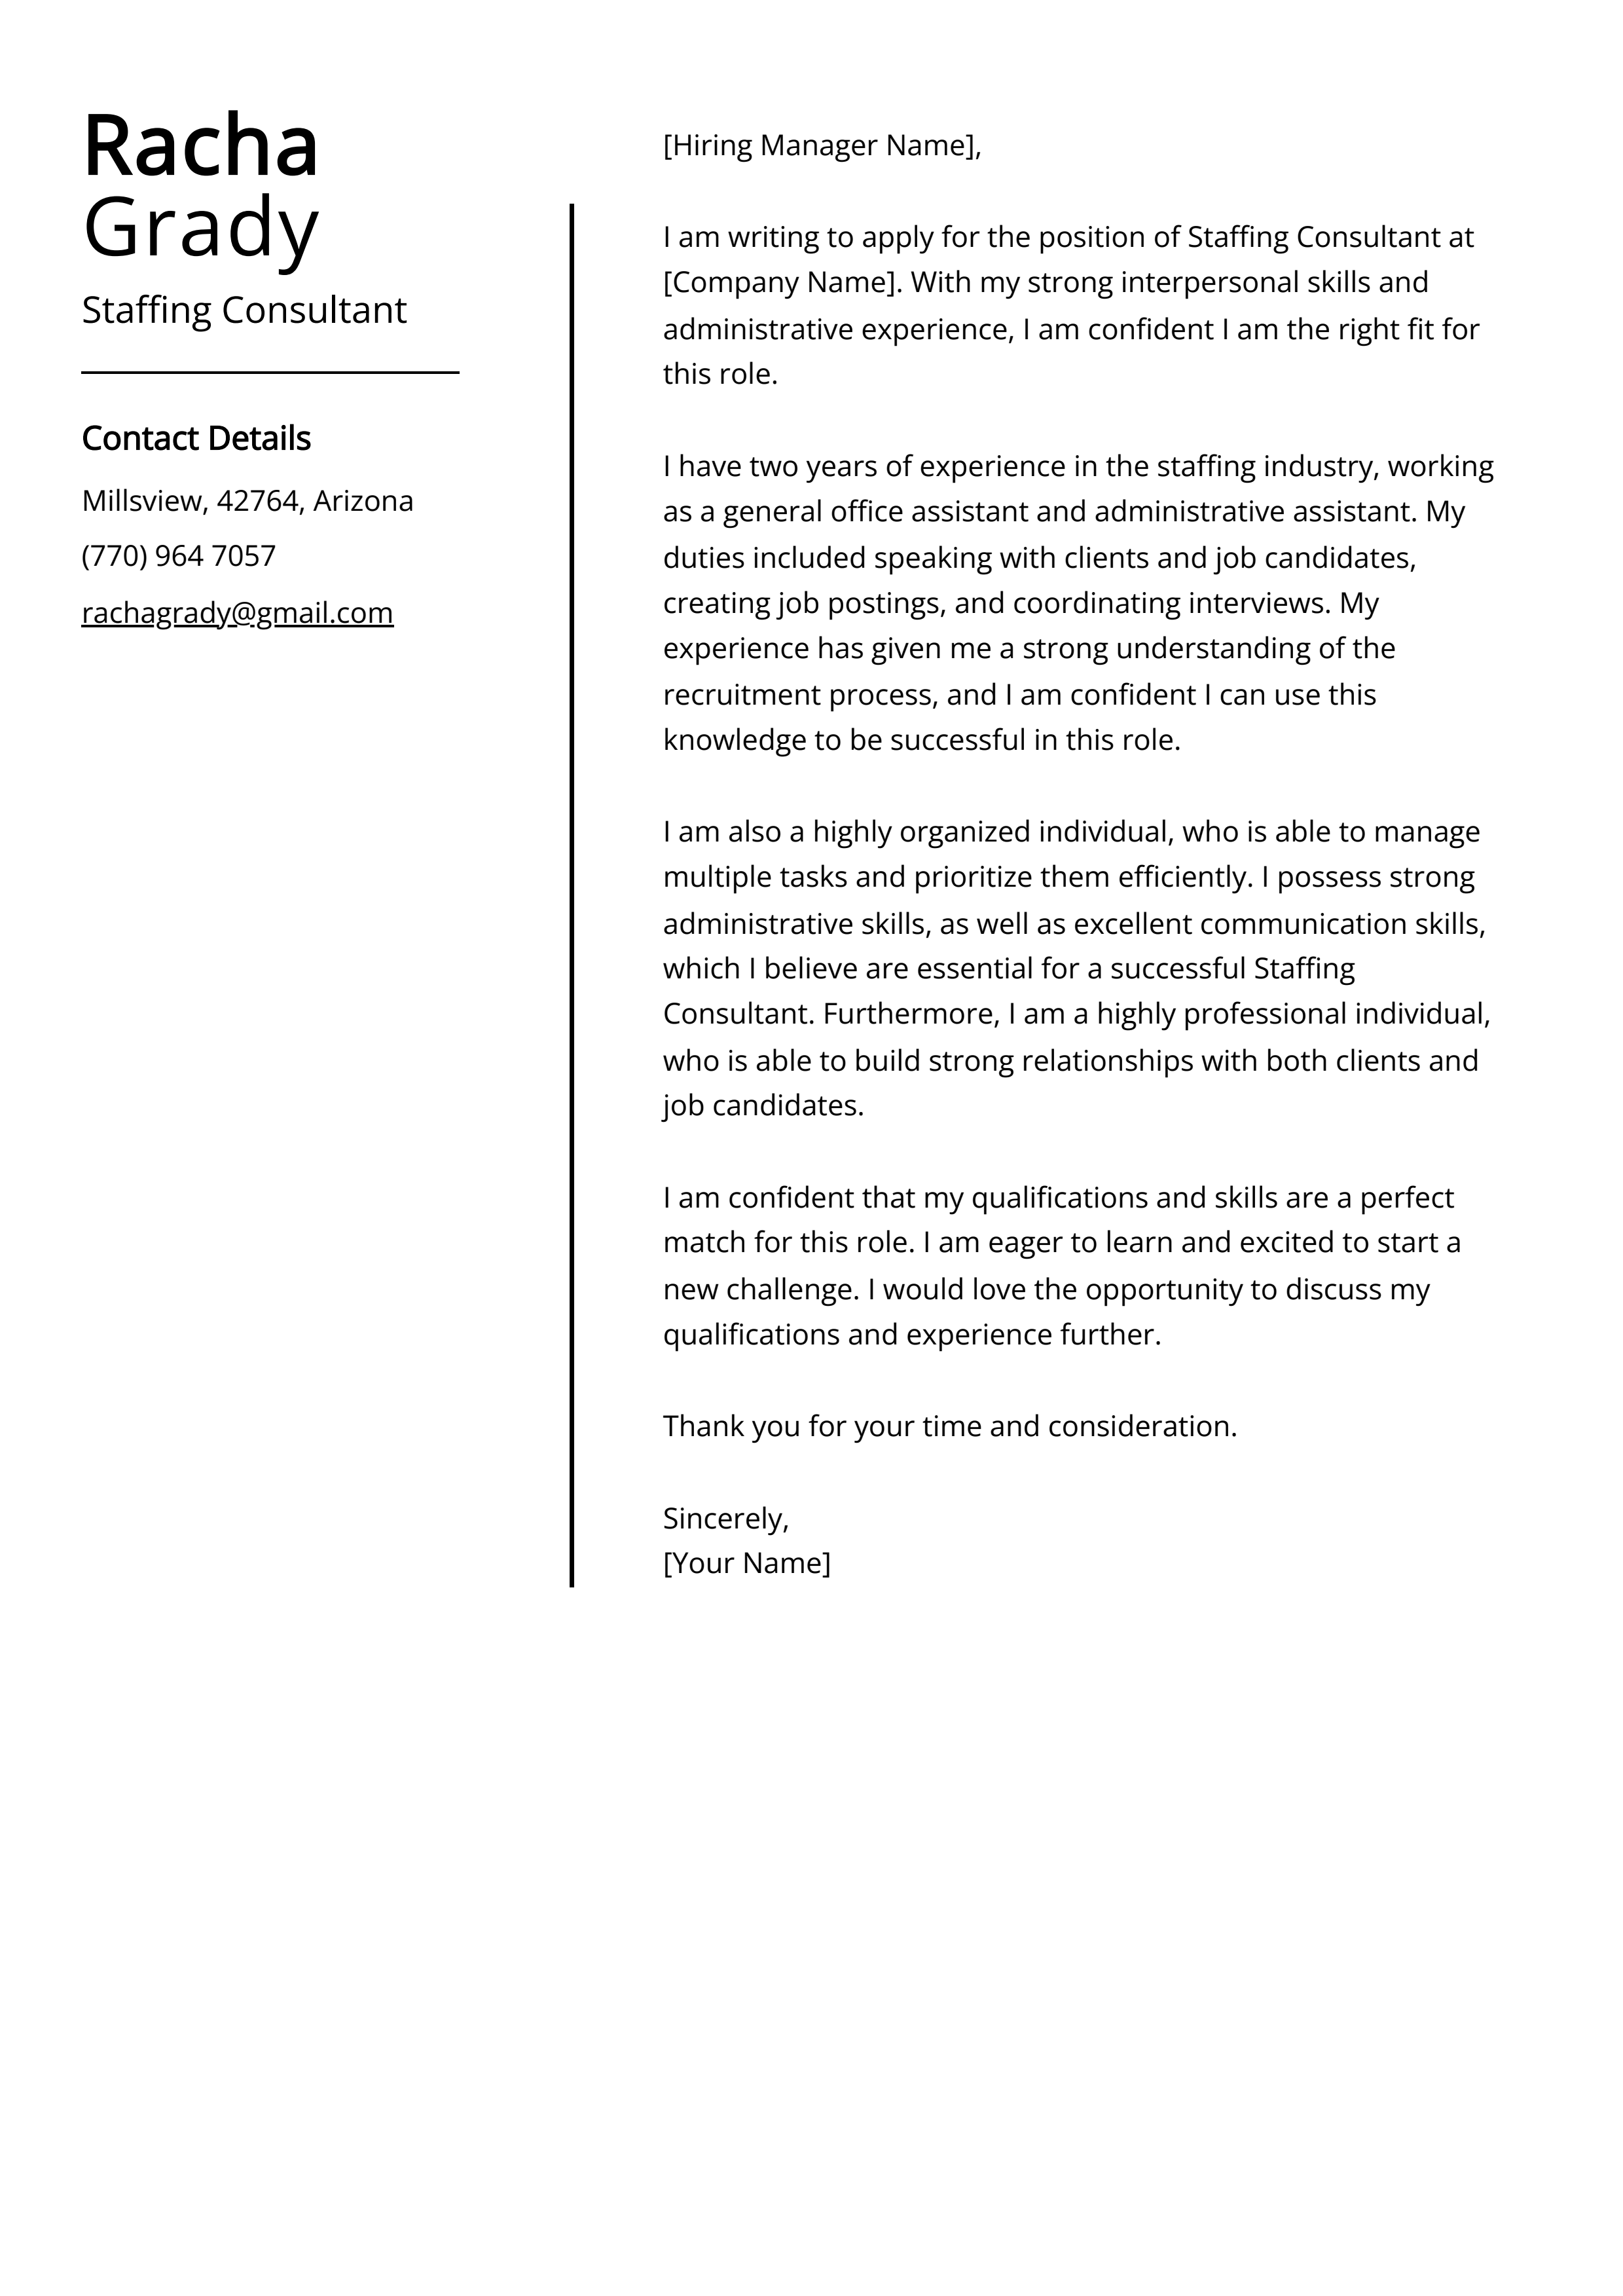 Staffing Consultant Cover Letter Example